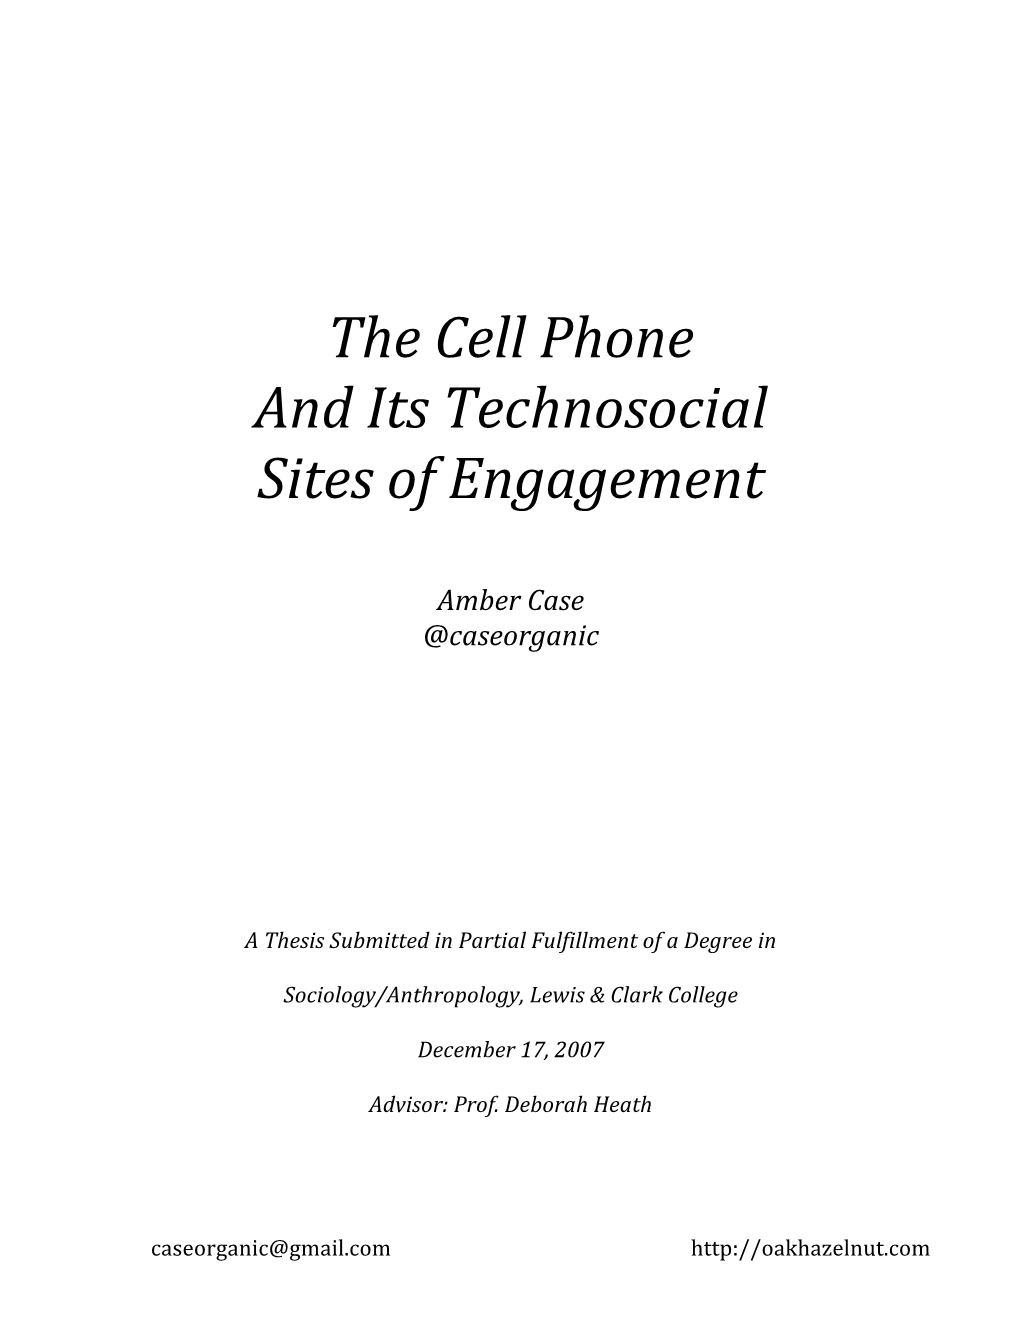 The Cell Phone and Its Technosocial Sites of Engagement Amber Case @Caseorganic